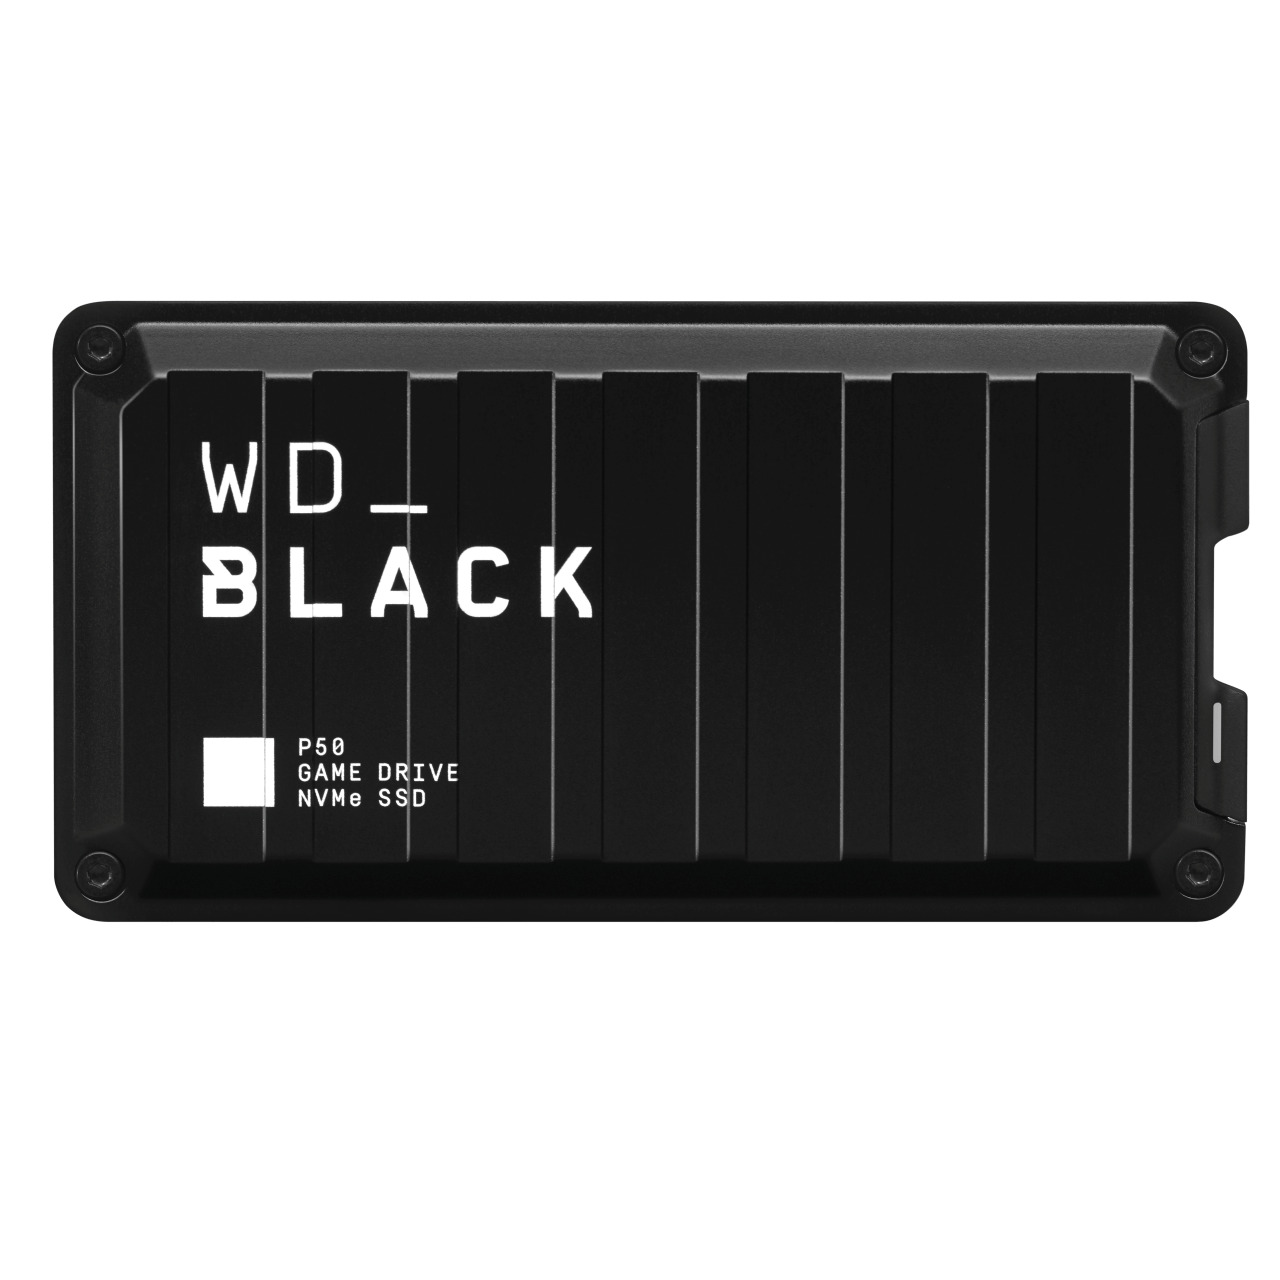 WD_BLACK 4TB P50 Game Drive SSD, External Solid State Drive - WDBA3S0040BBK-WESN